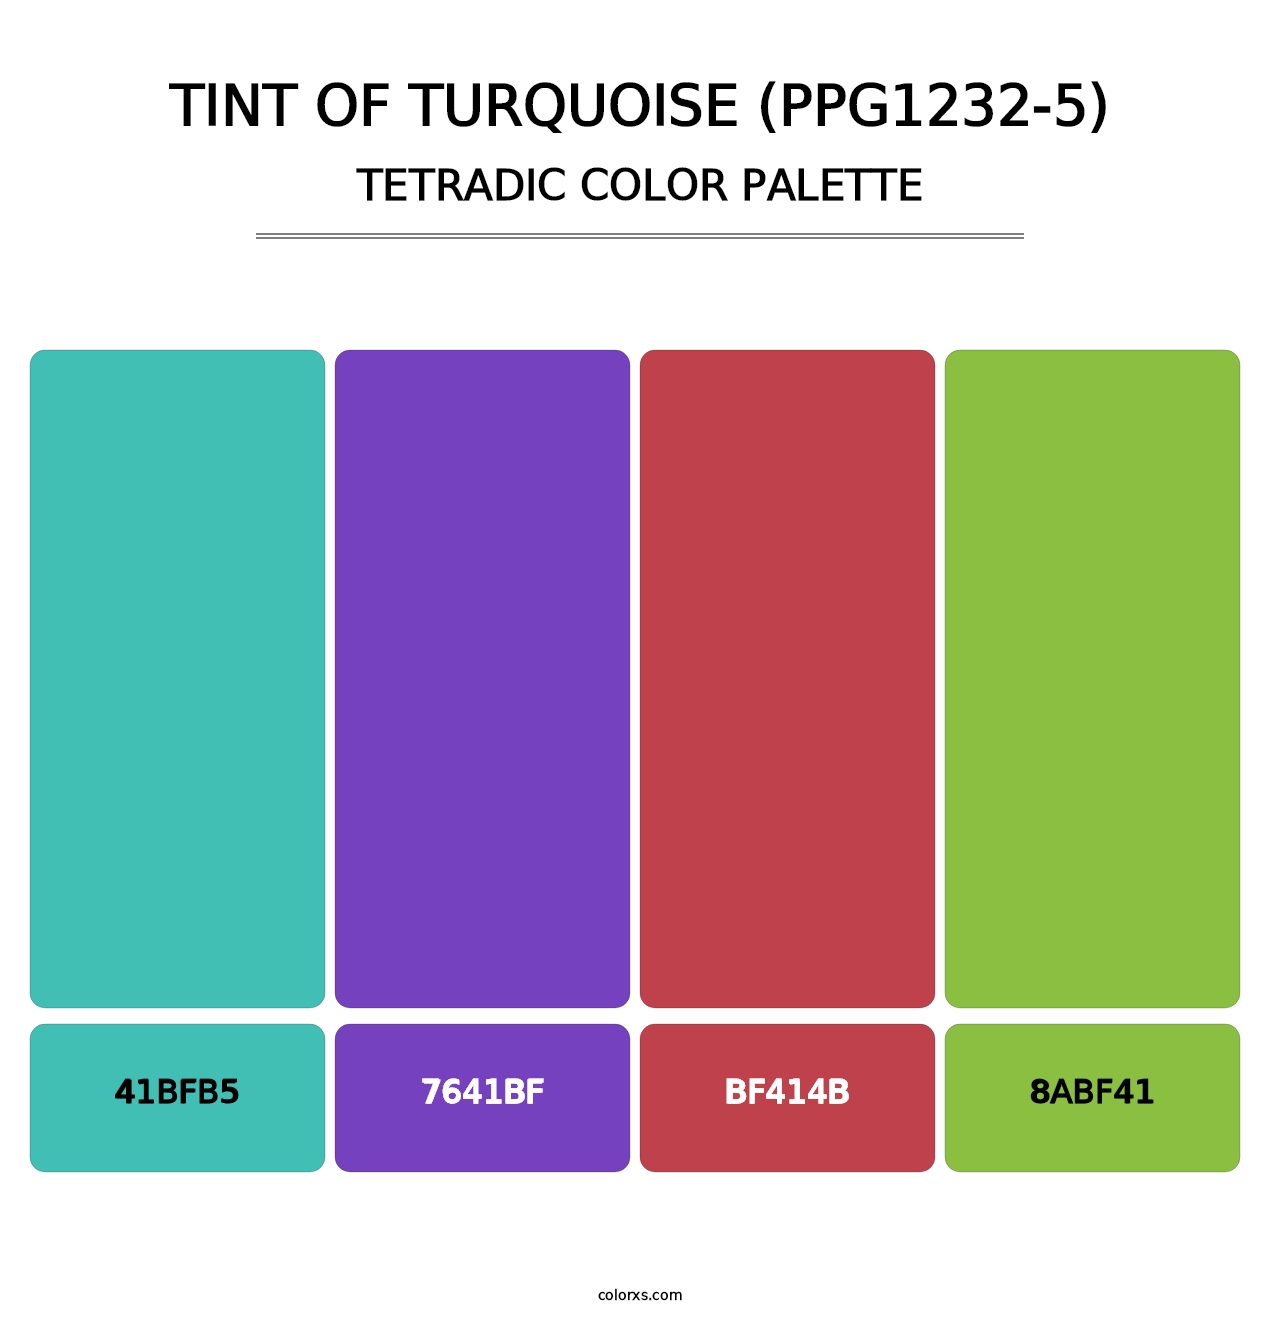 Tint Of Turquoise (PPG1232-5) - Tetradic Color Palette